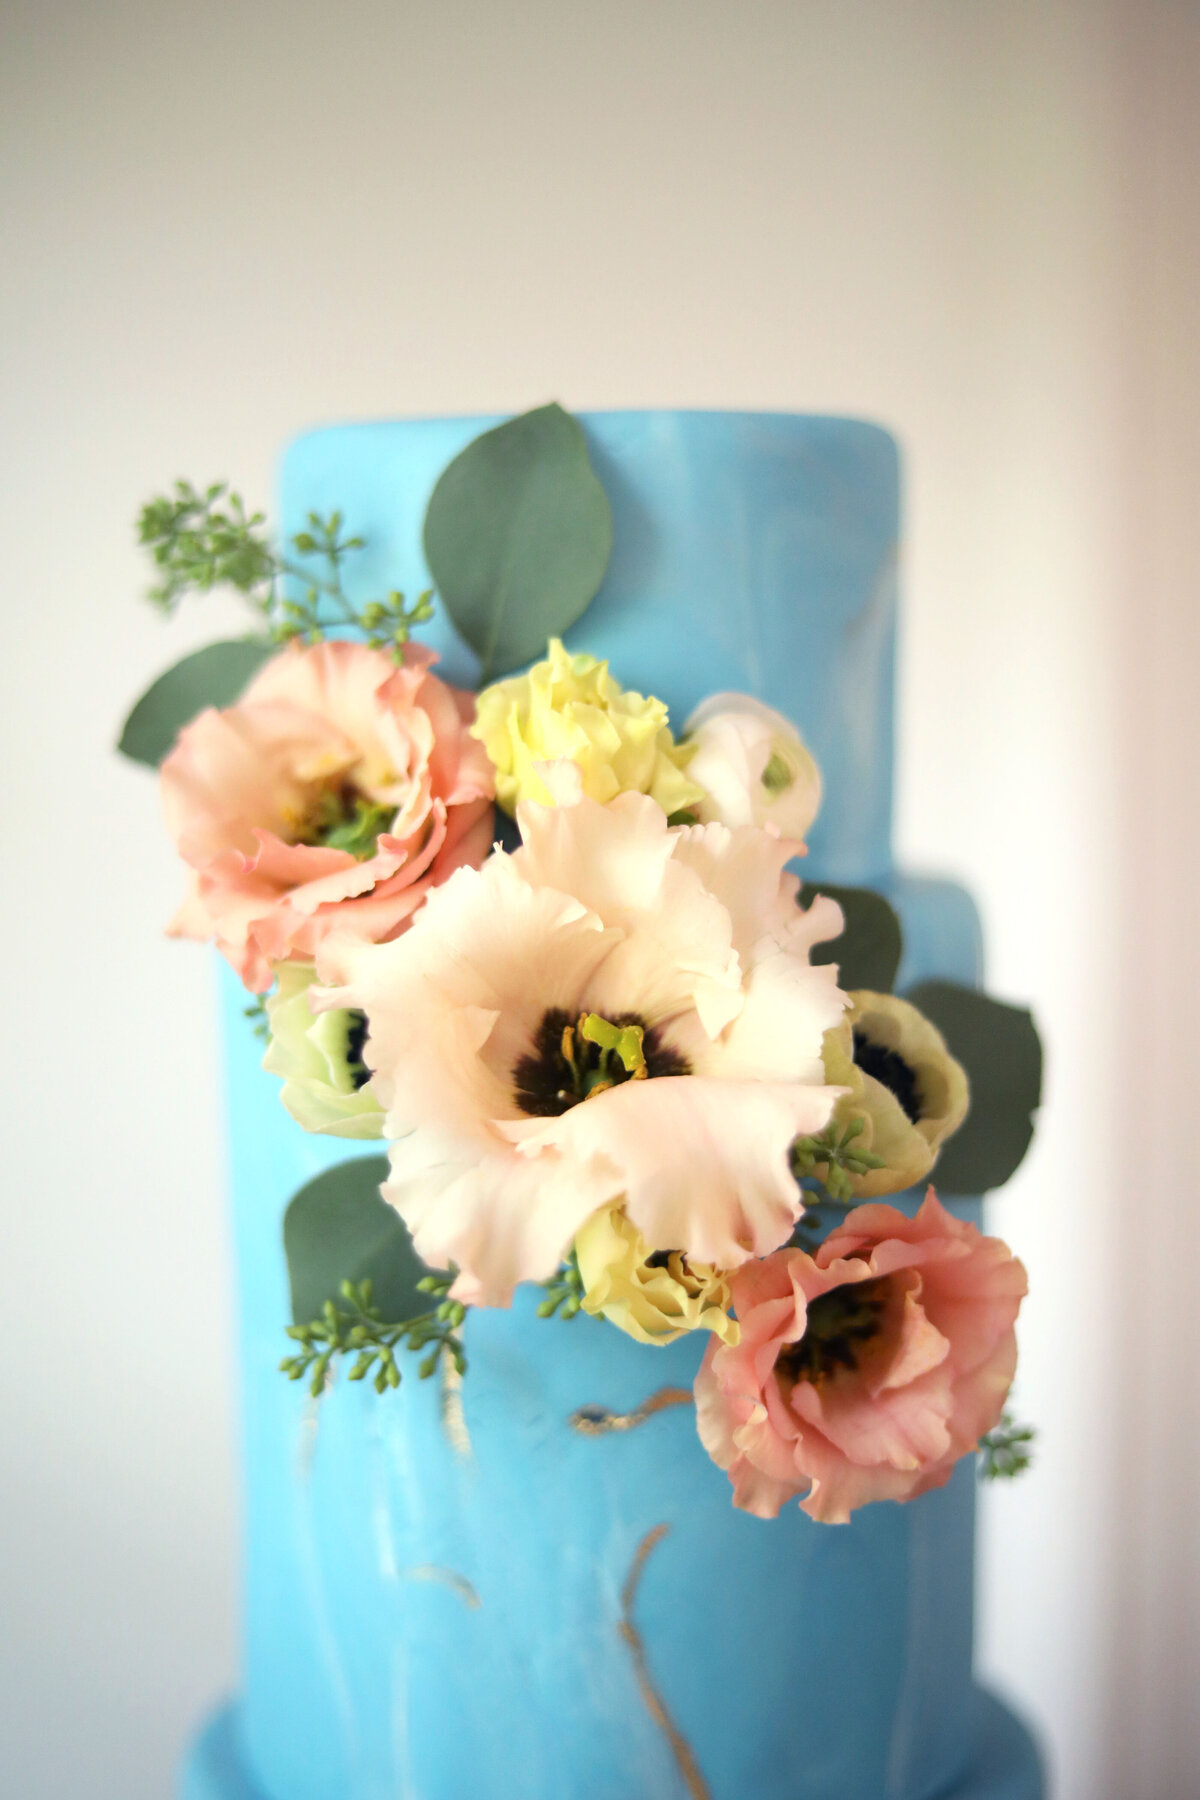 Wedding Cake with Flower Accent